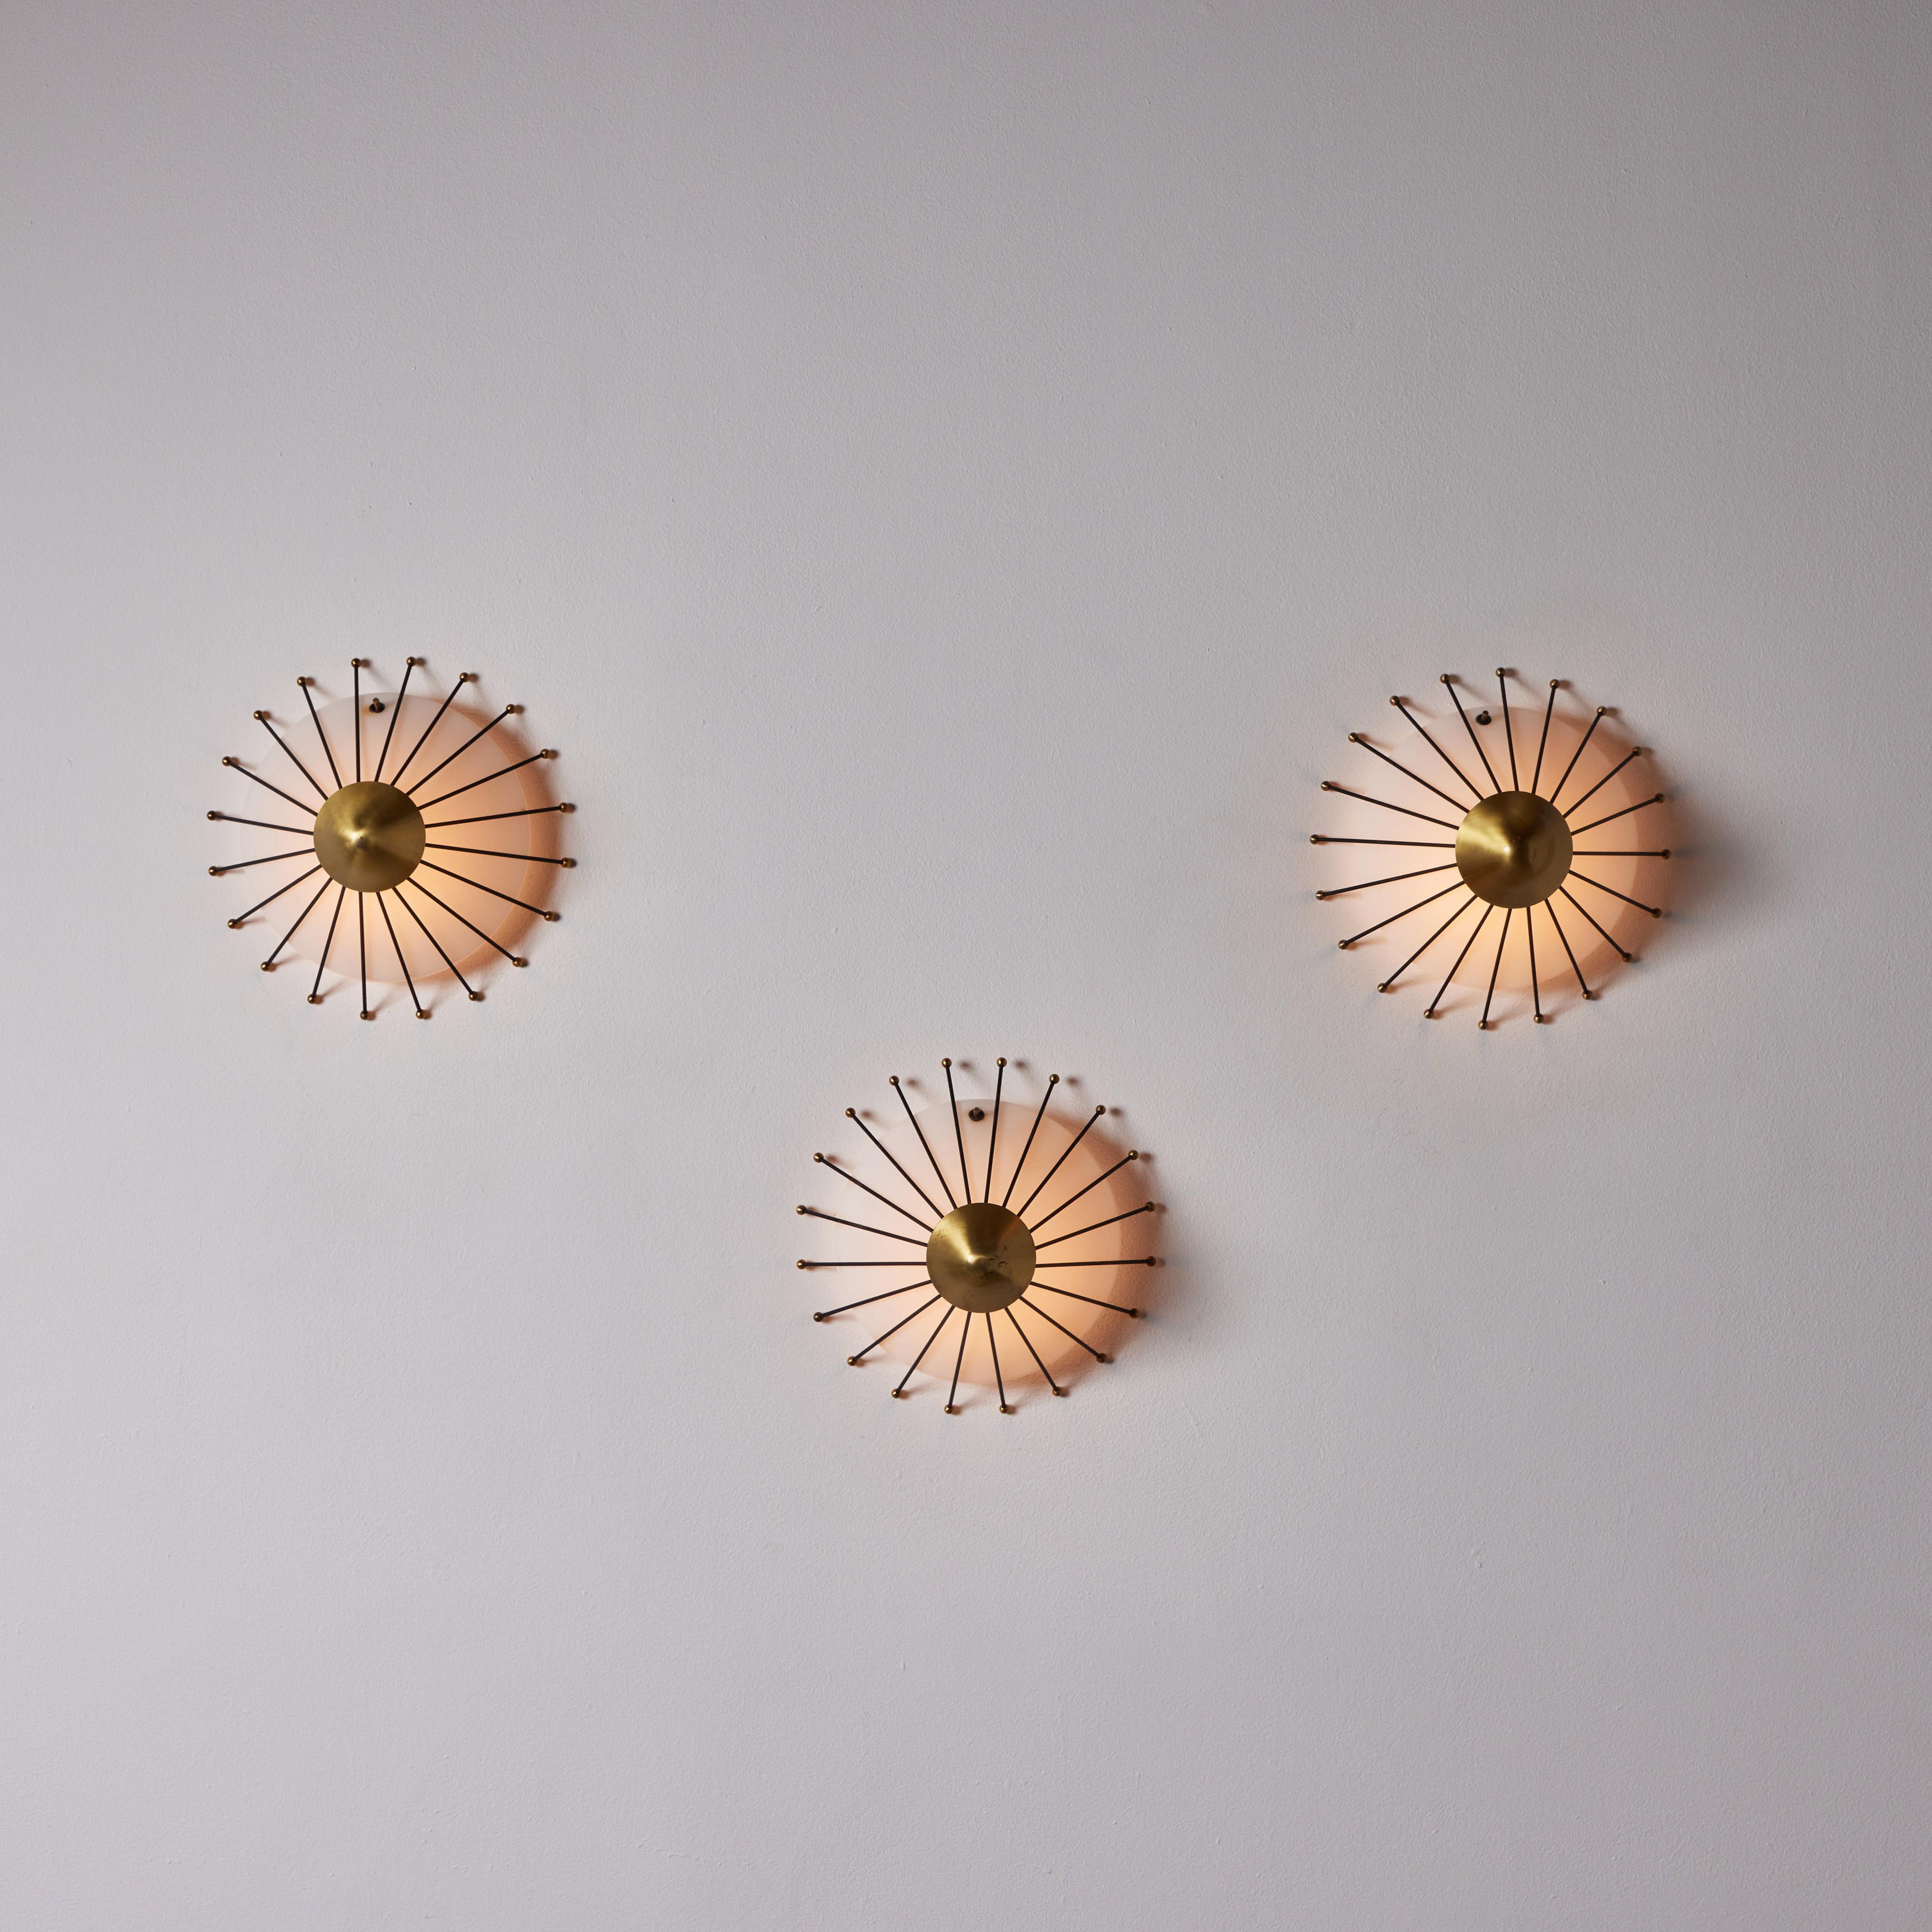 Three Sconces by Stilux. Manufactured in Italy, circa 1950s. Opal glass, painted metal, brass. Custom brass ceiling plates. Wired for U.S. standards. We recommend three E27 25w maximum bulbs per fixture. Bulbs not provided. Priced and sold